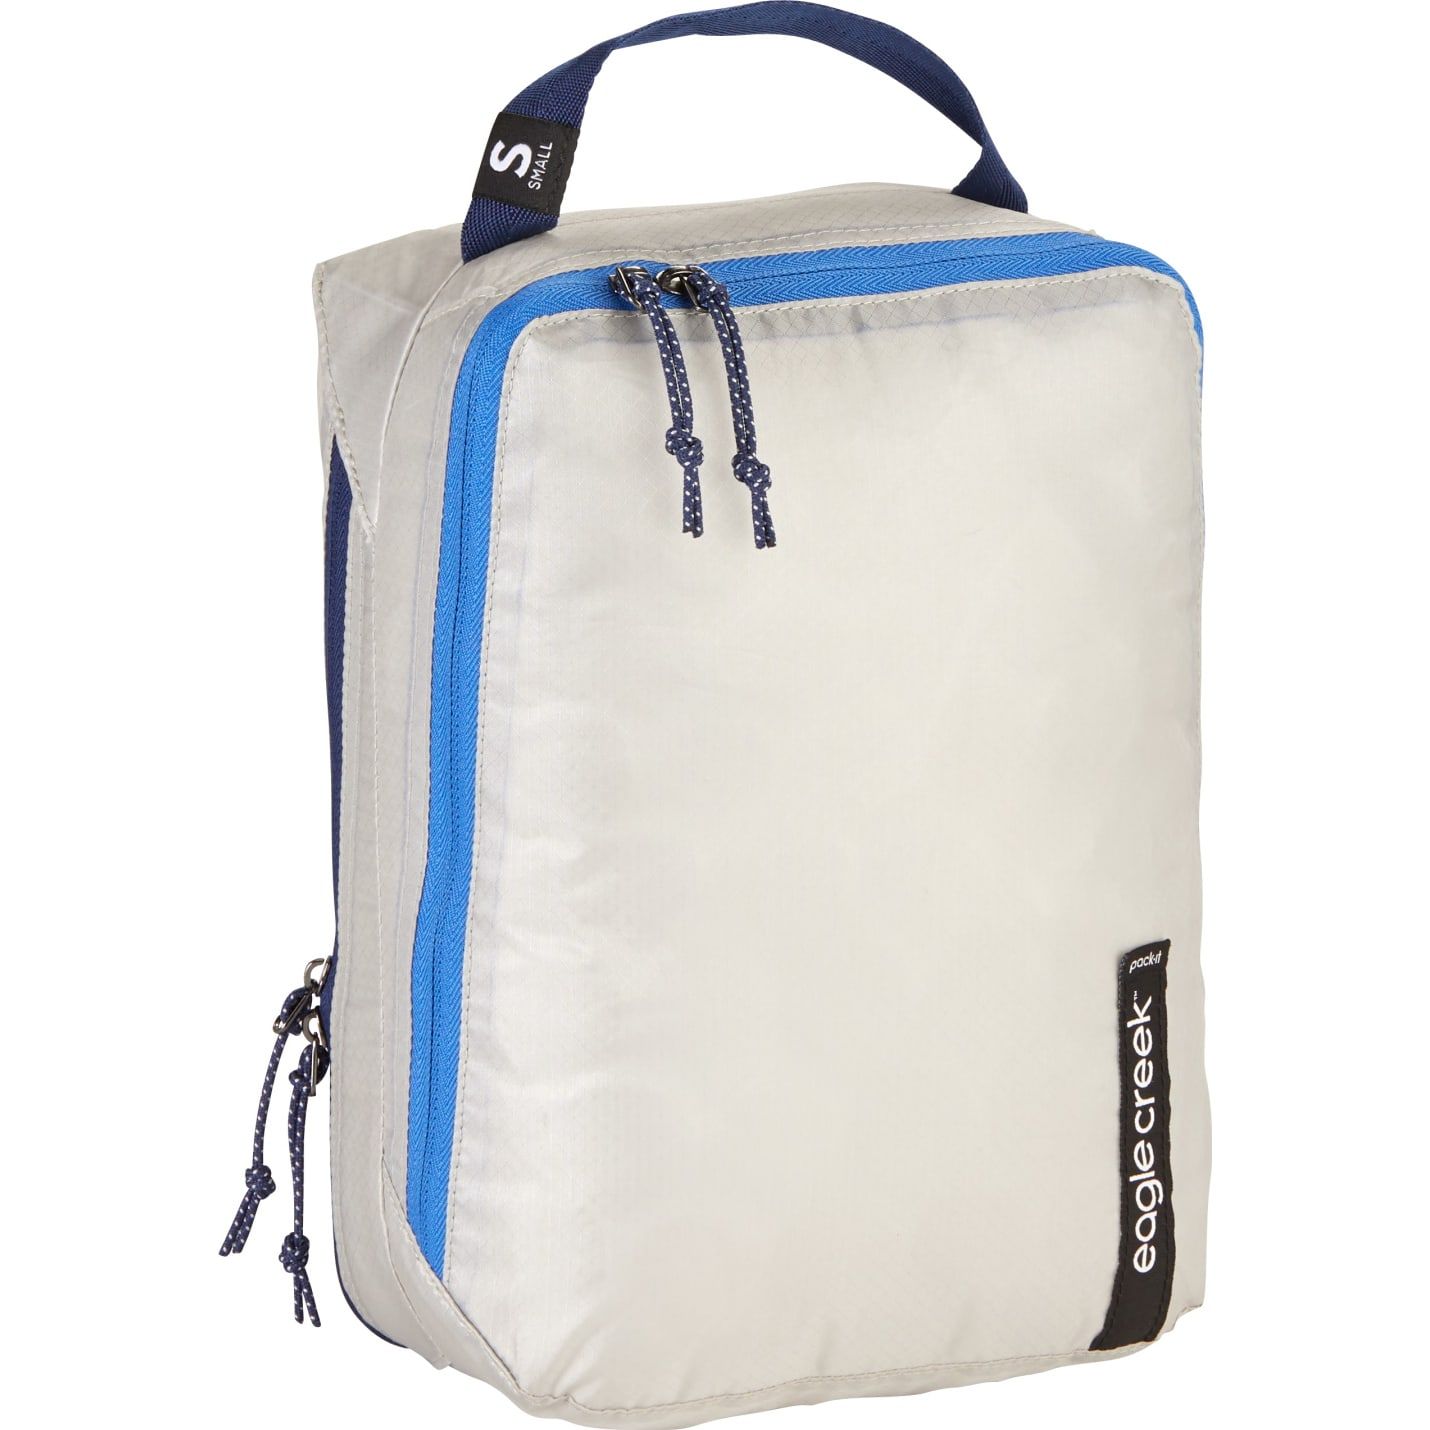 Pack-It Isolate Clean/Dirty Cube S Az Blue/Grey